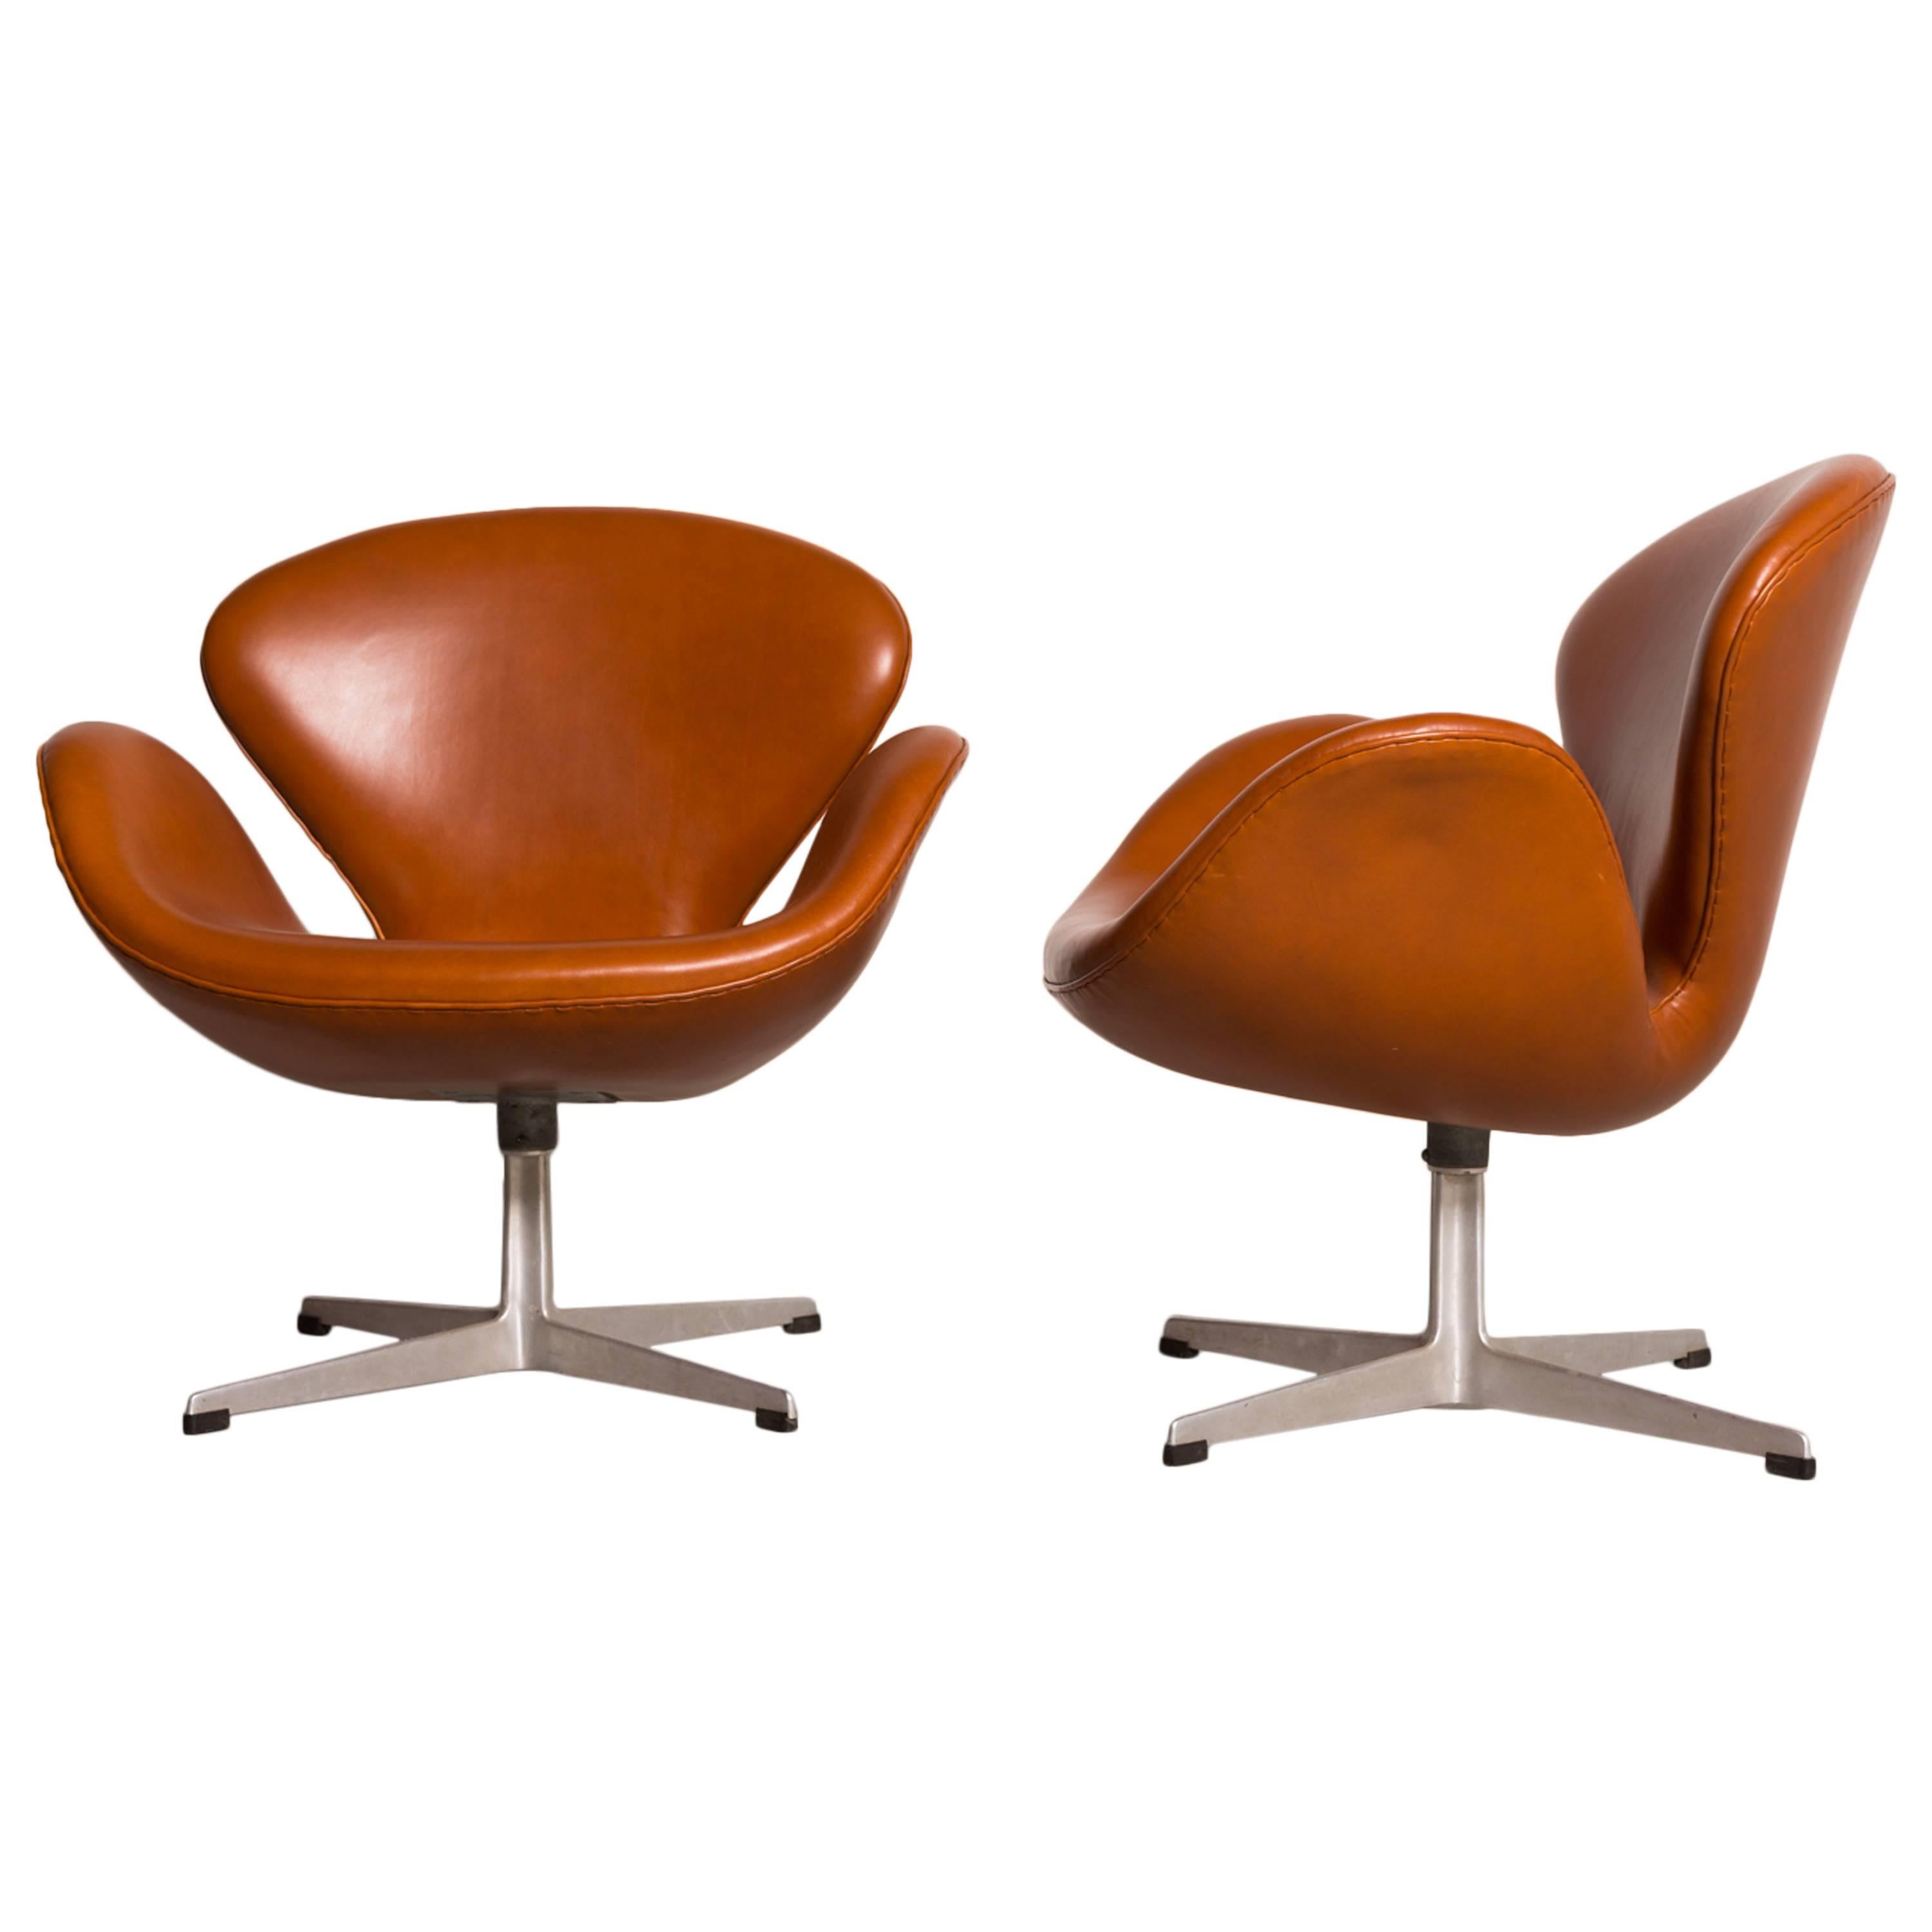 Early Arne Jacobsen Pair of Swan Chairs for Fritz Hansen, 1950s